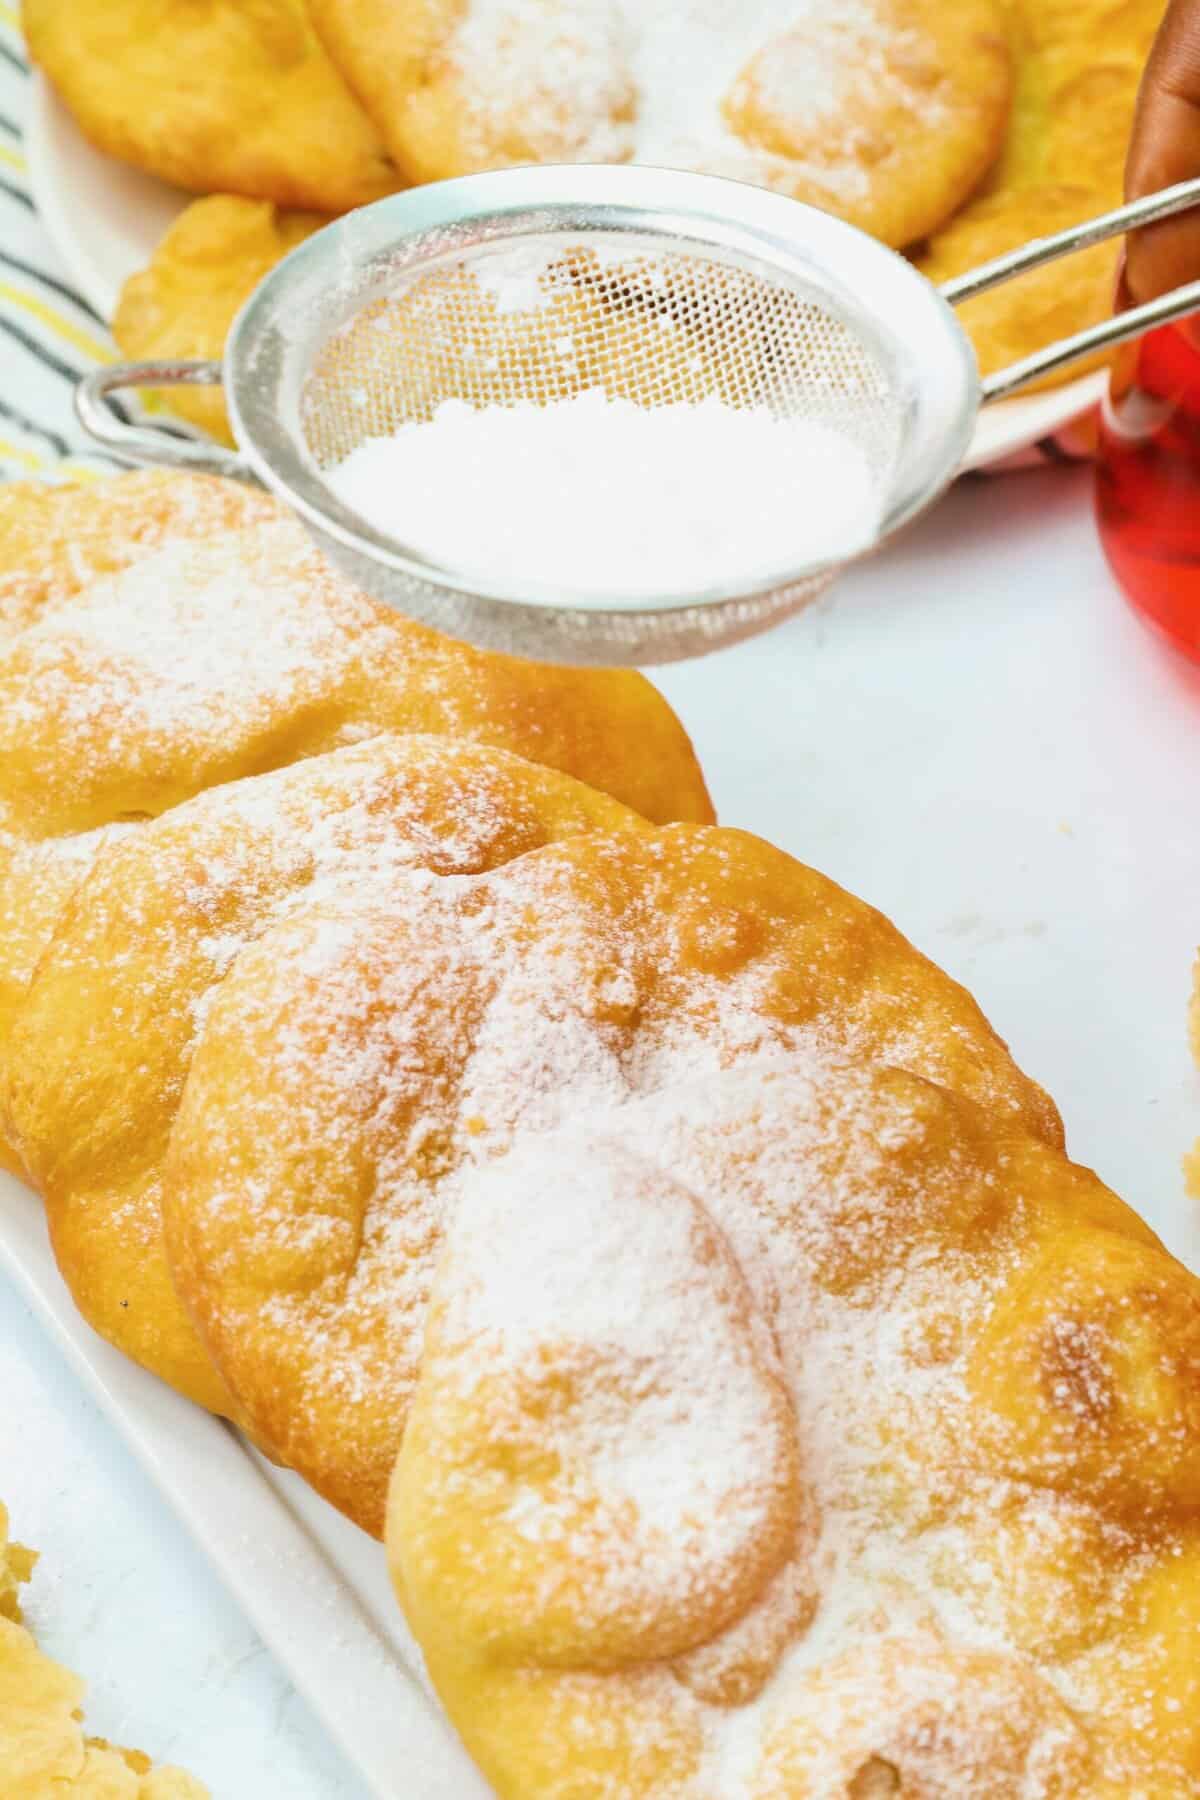 Sprinkle powdered sugar on exquisite fried dough